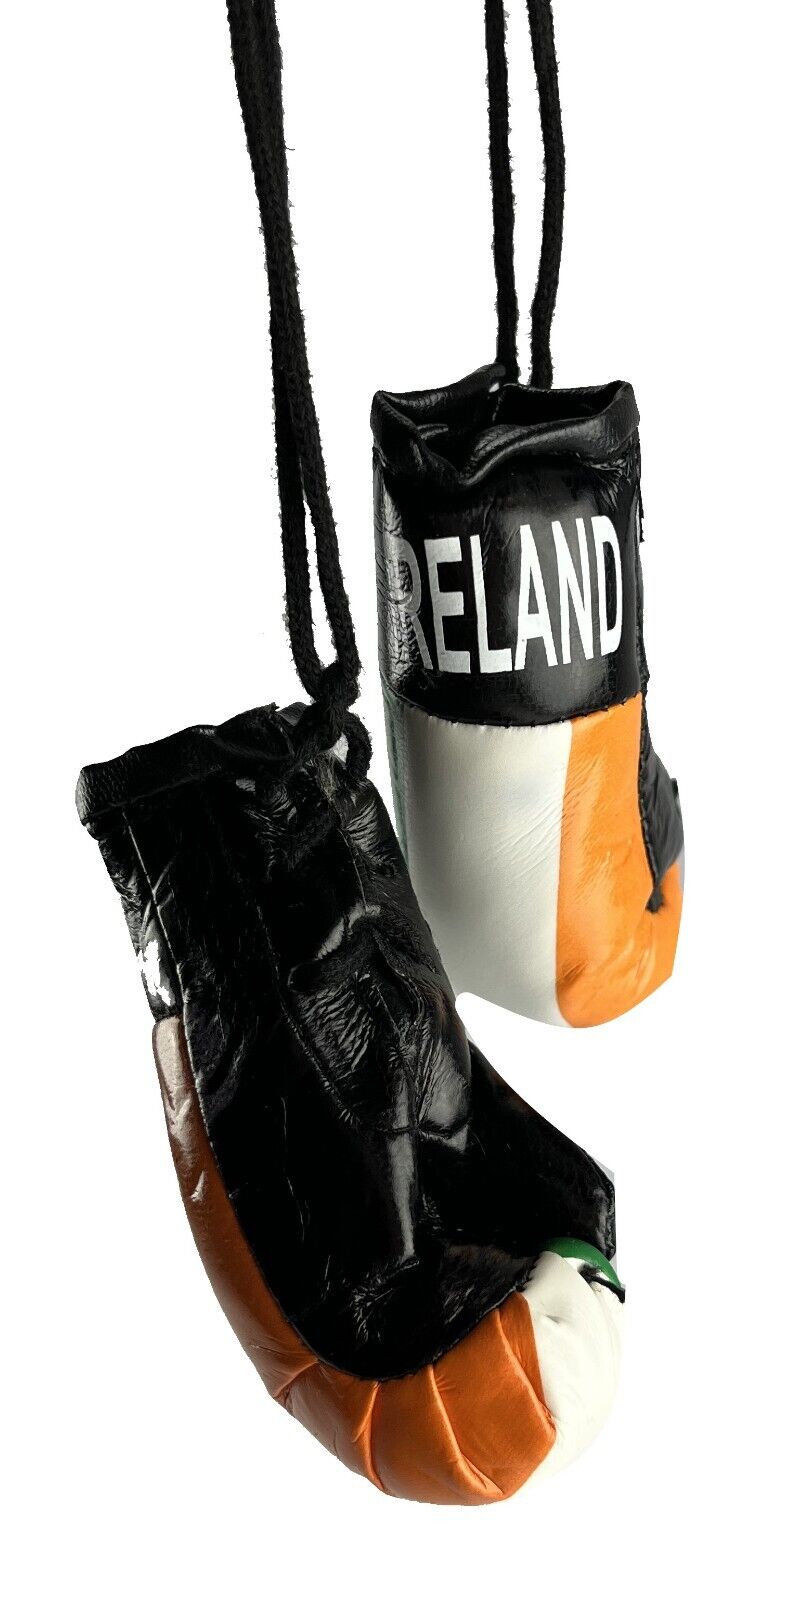 Lot of 100 Mini Boxing Gloves Wholesale IRELAND National Pride MMA Boxing Gloves